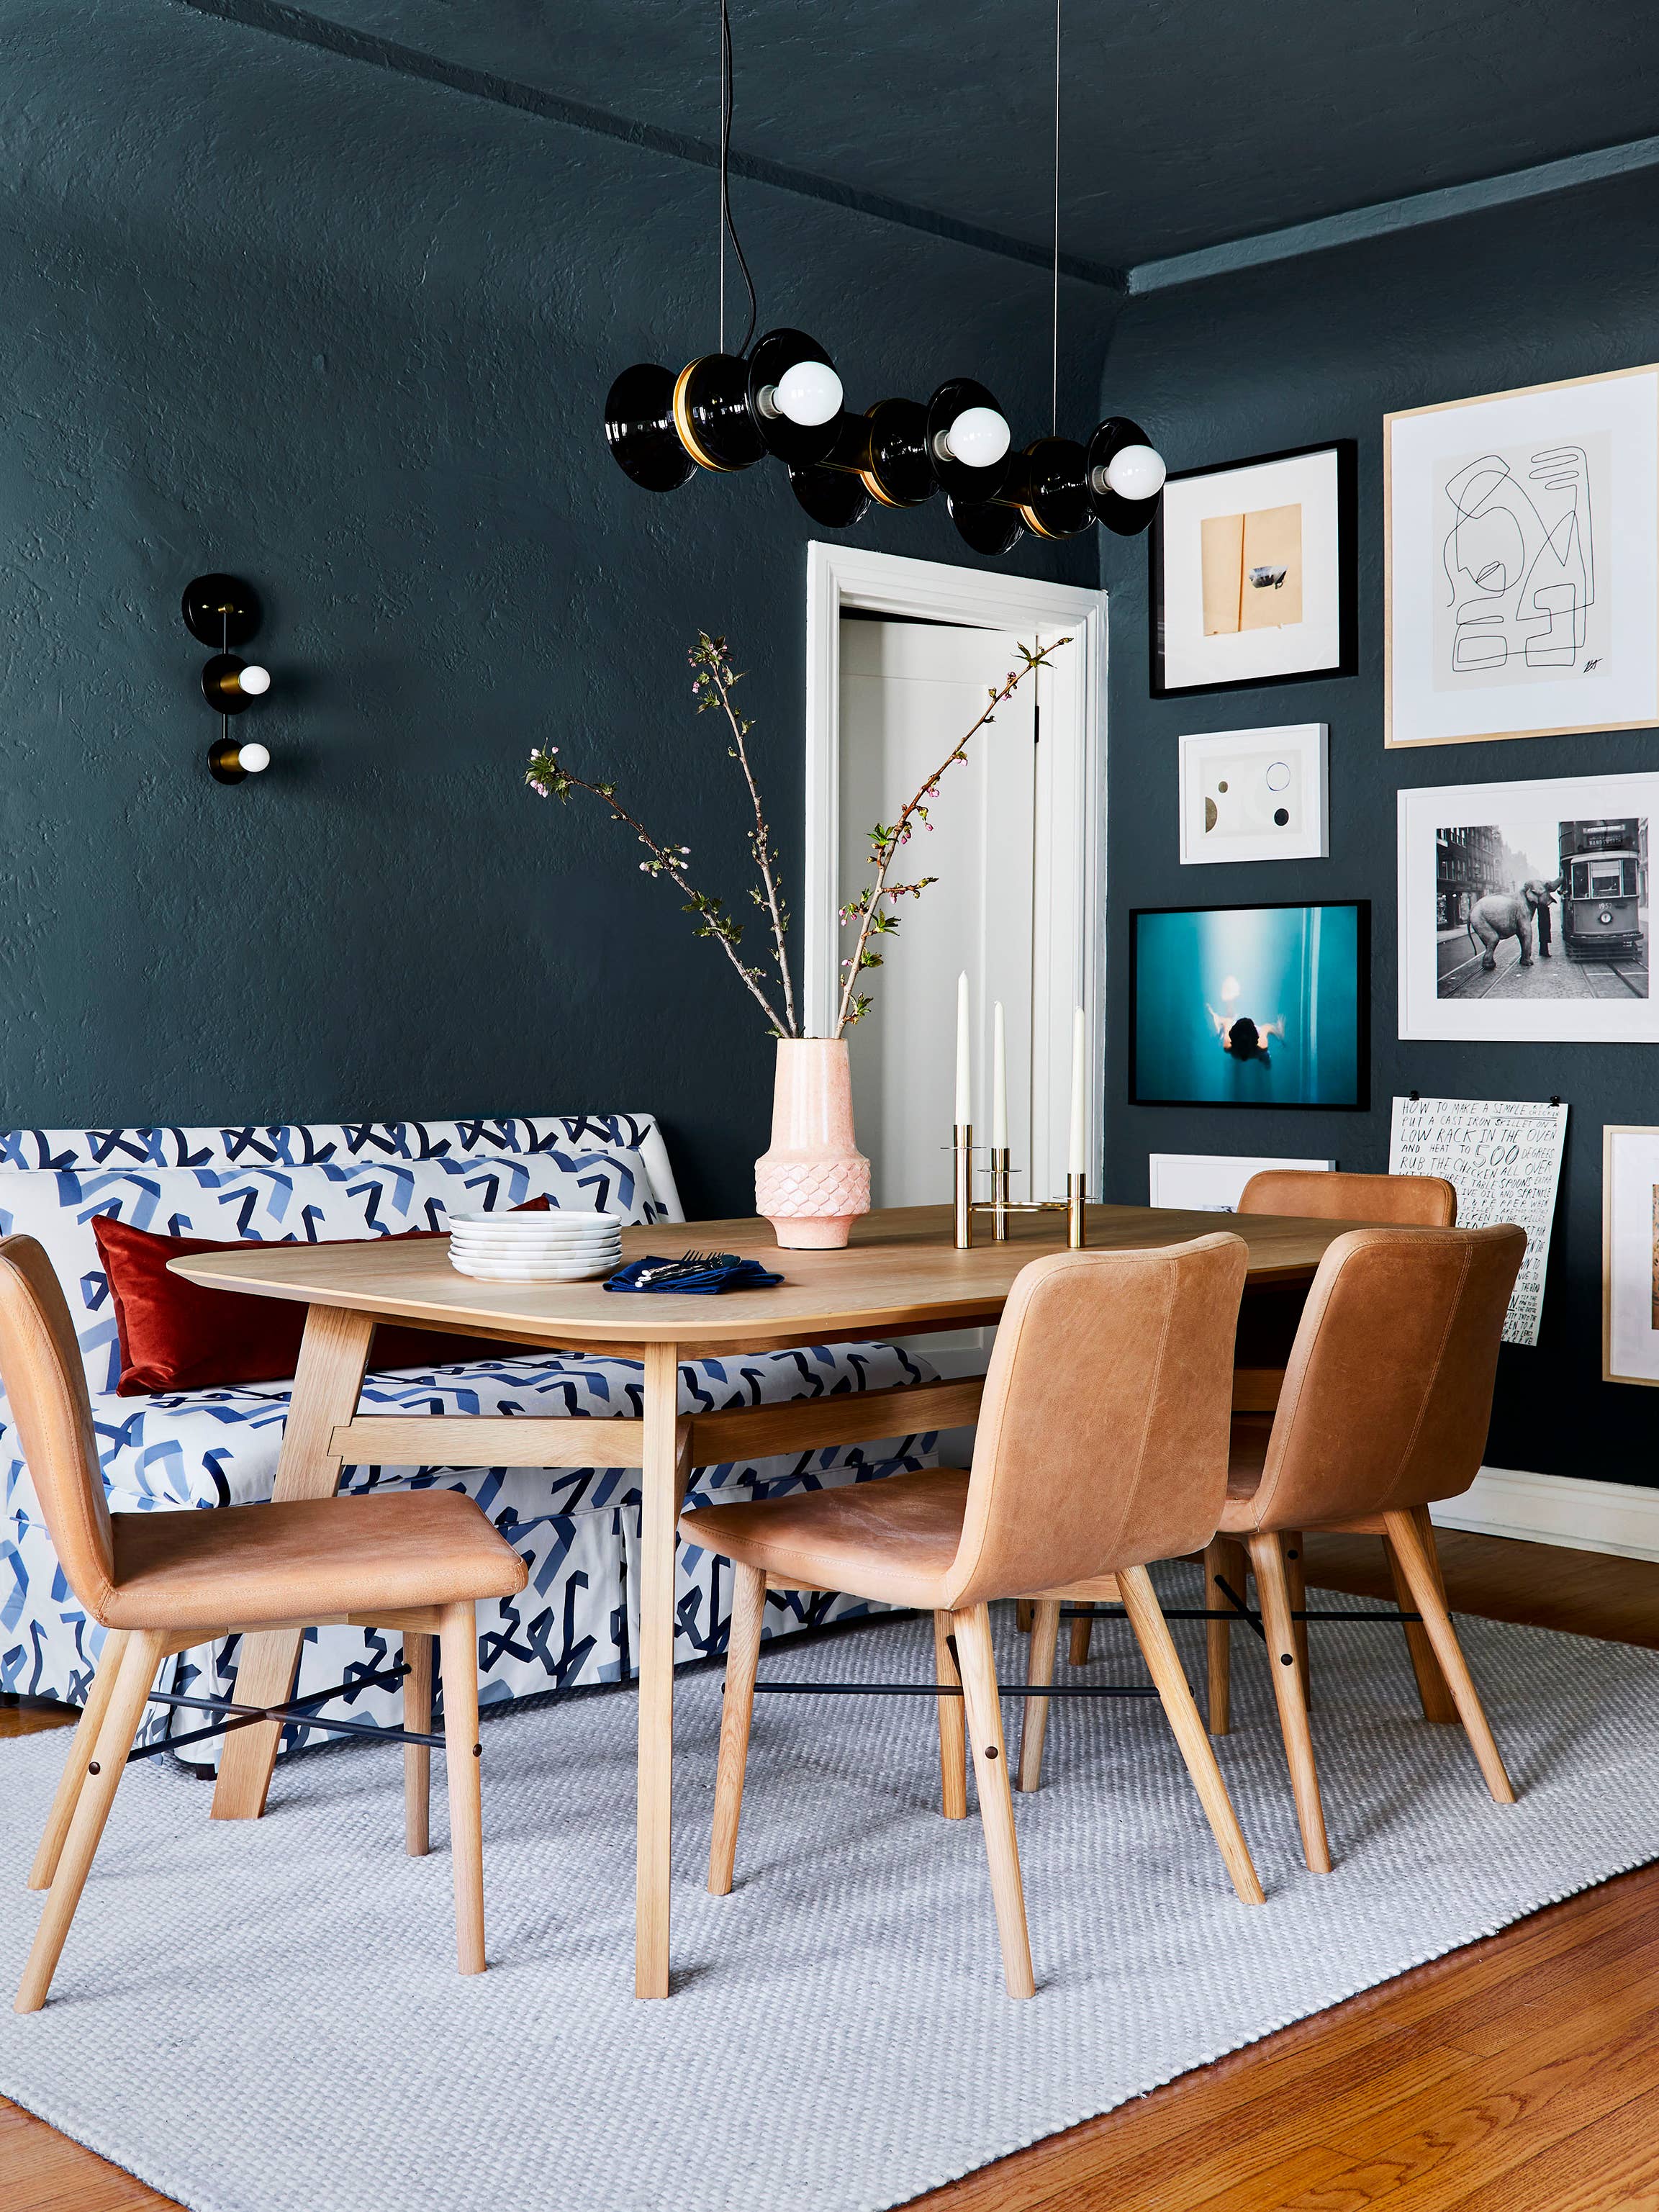 Of Course, Emily Henderson’s Editorial Director Has the Most Incredible Dining Room